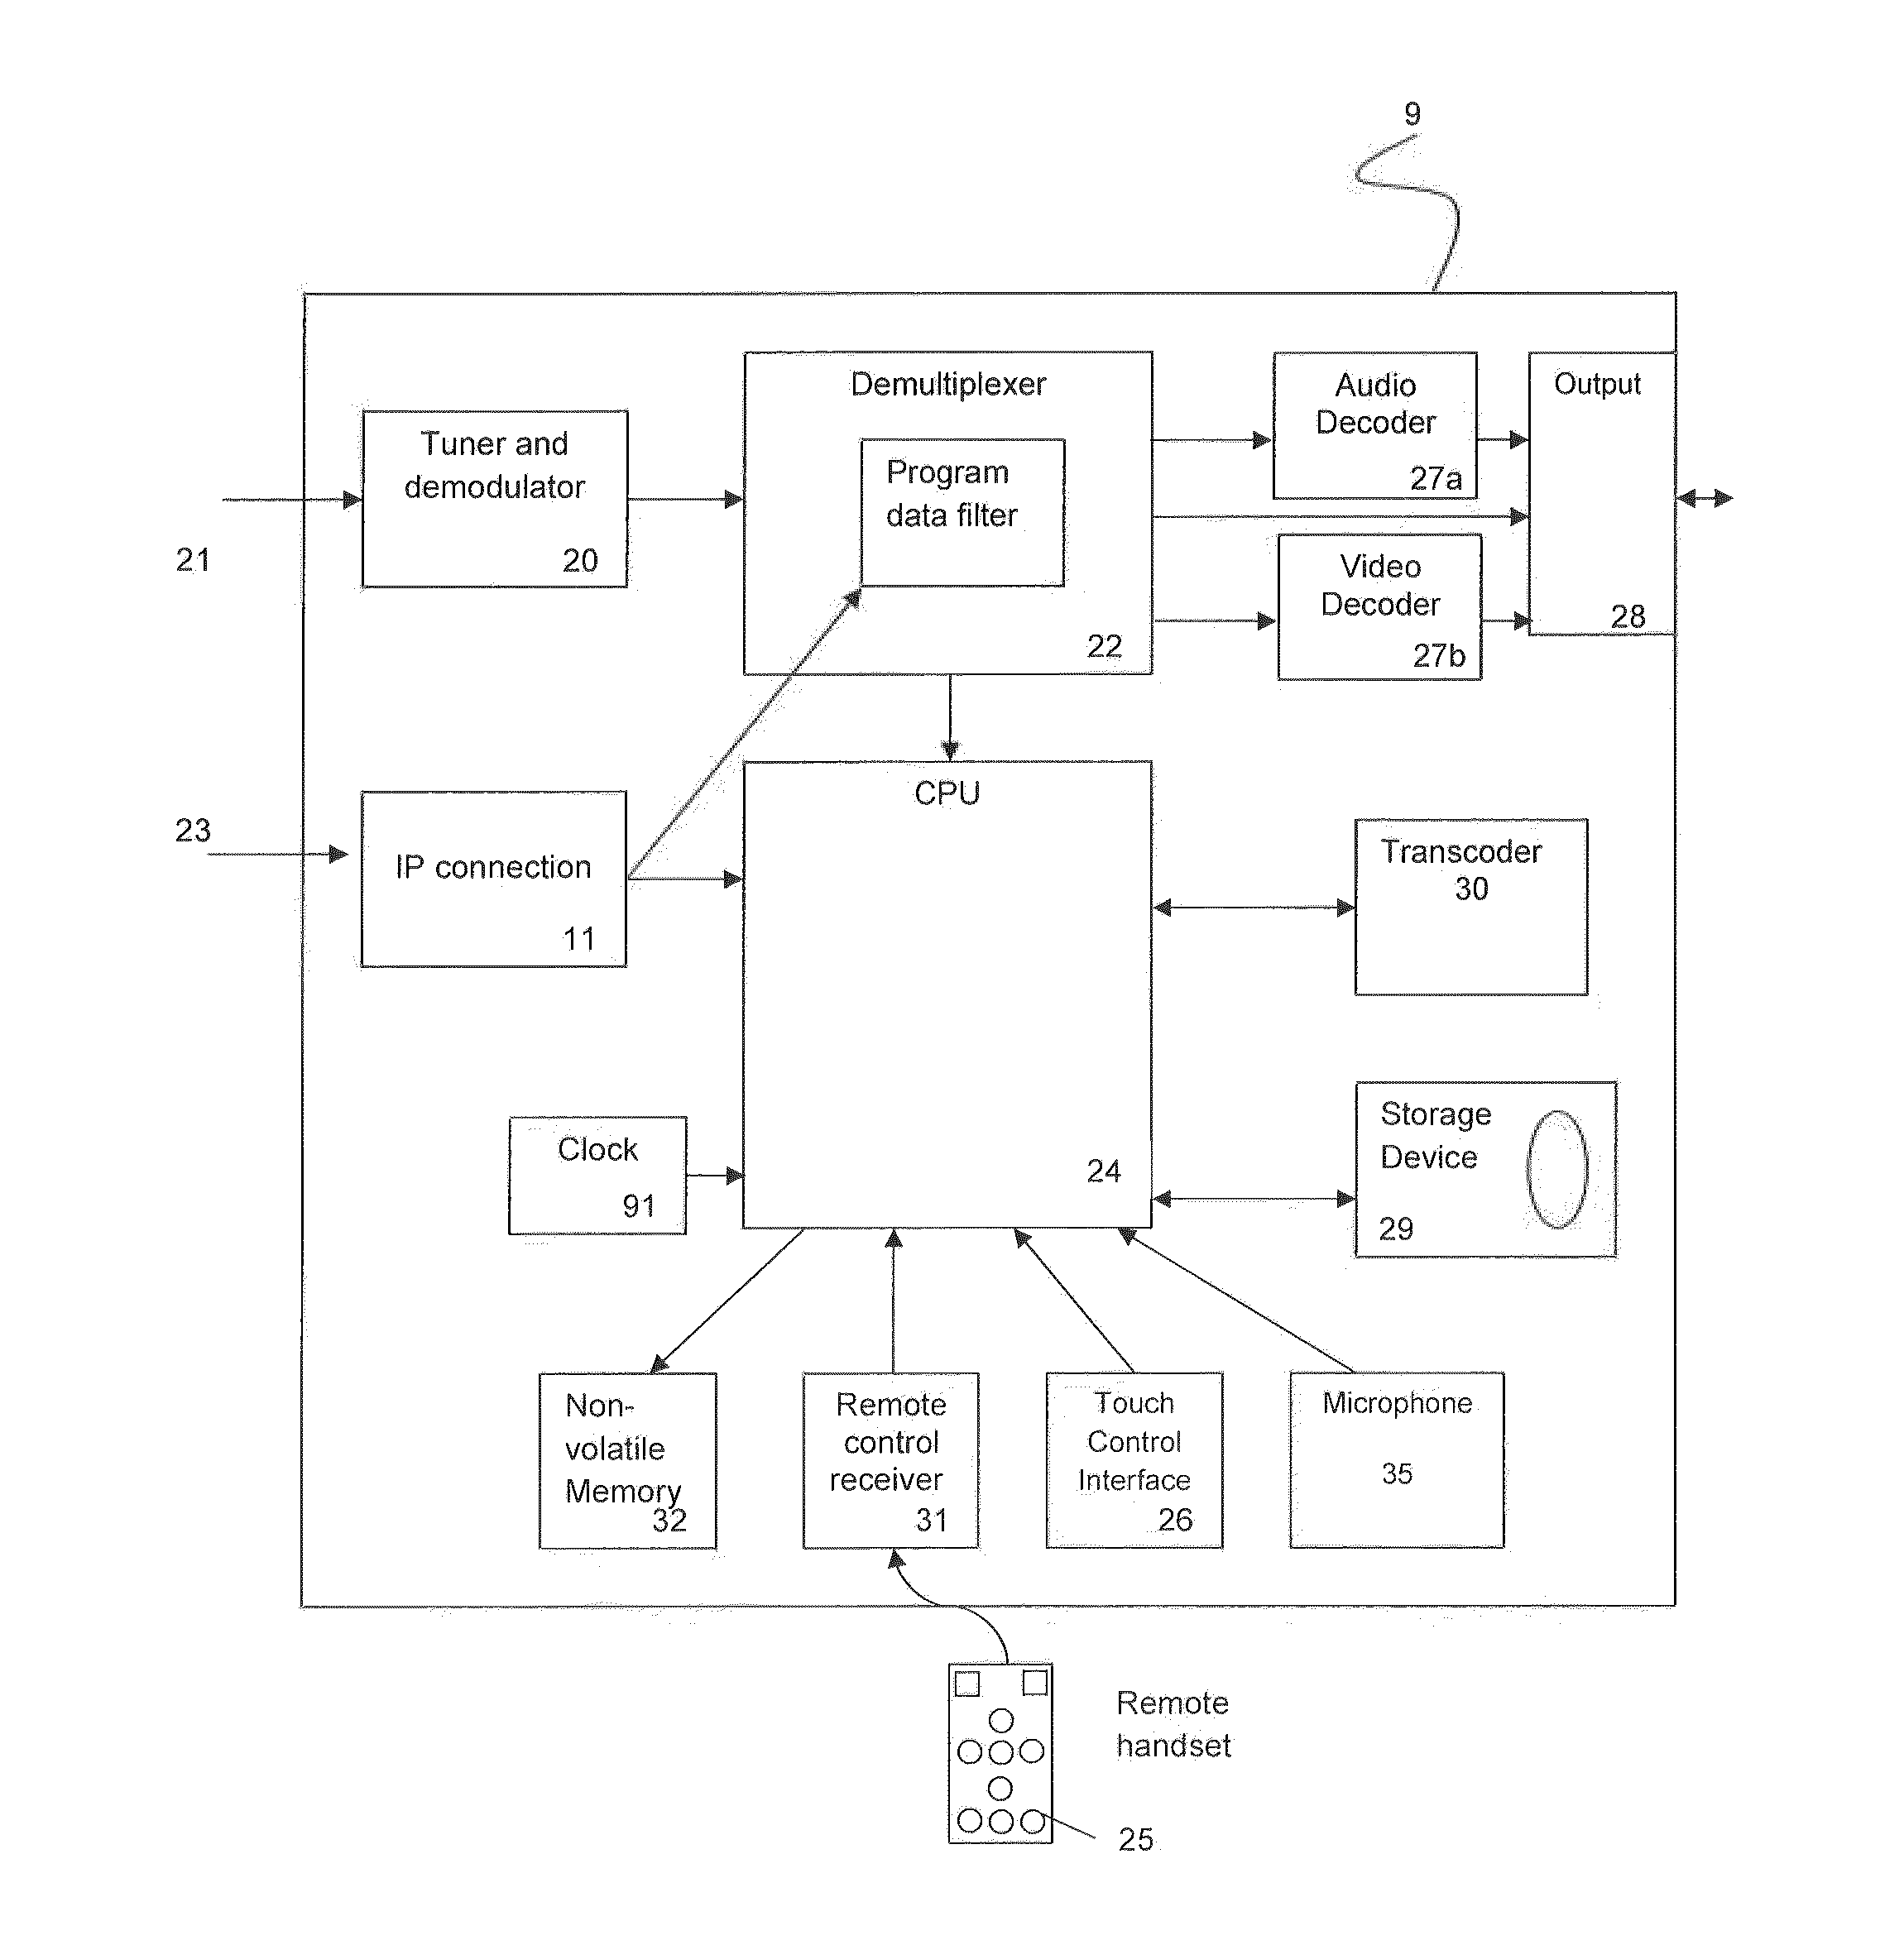 Loudness level control for audio reception and decoding equipment